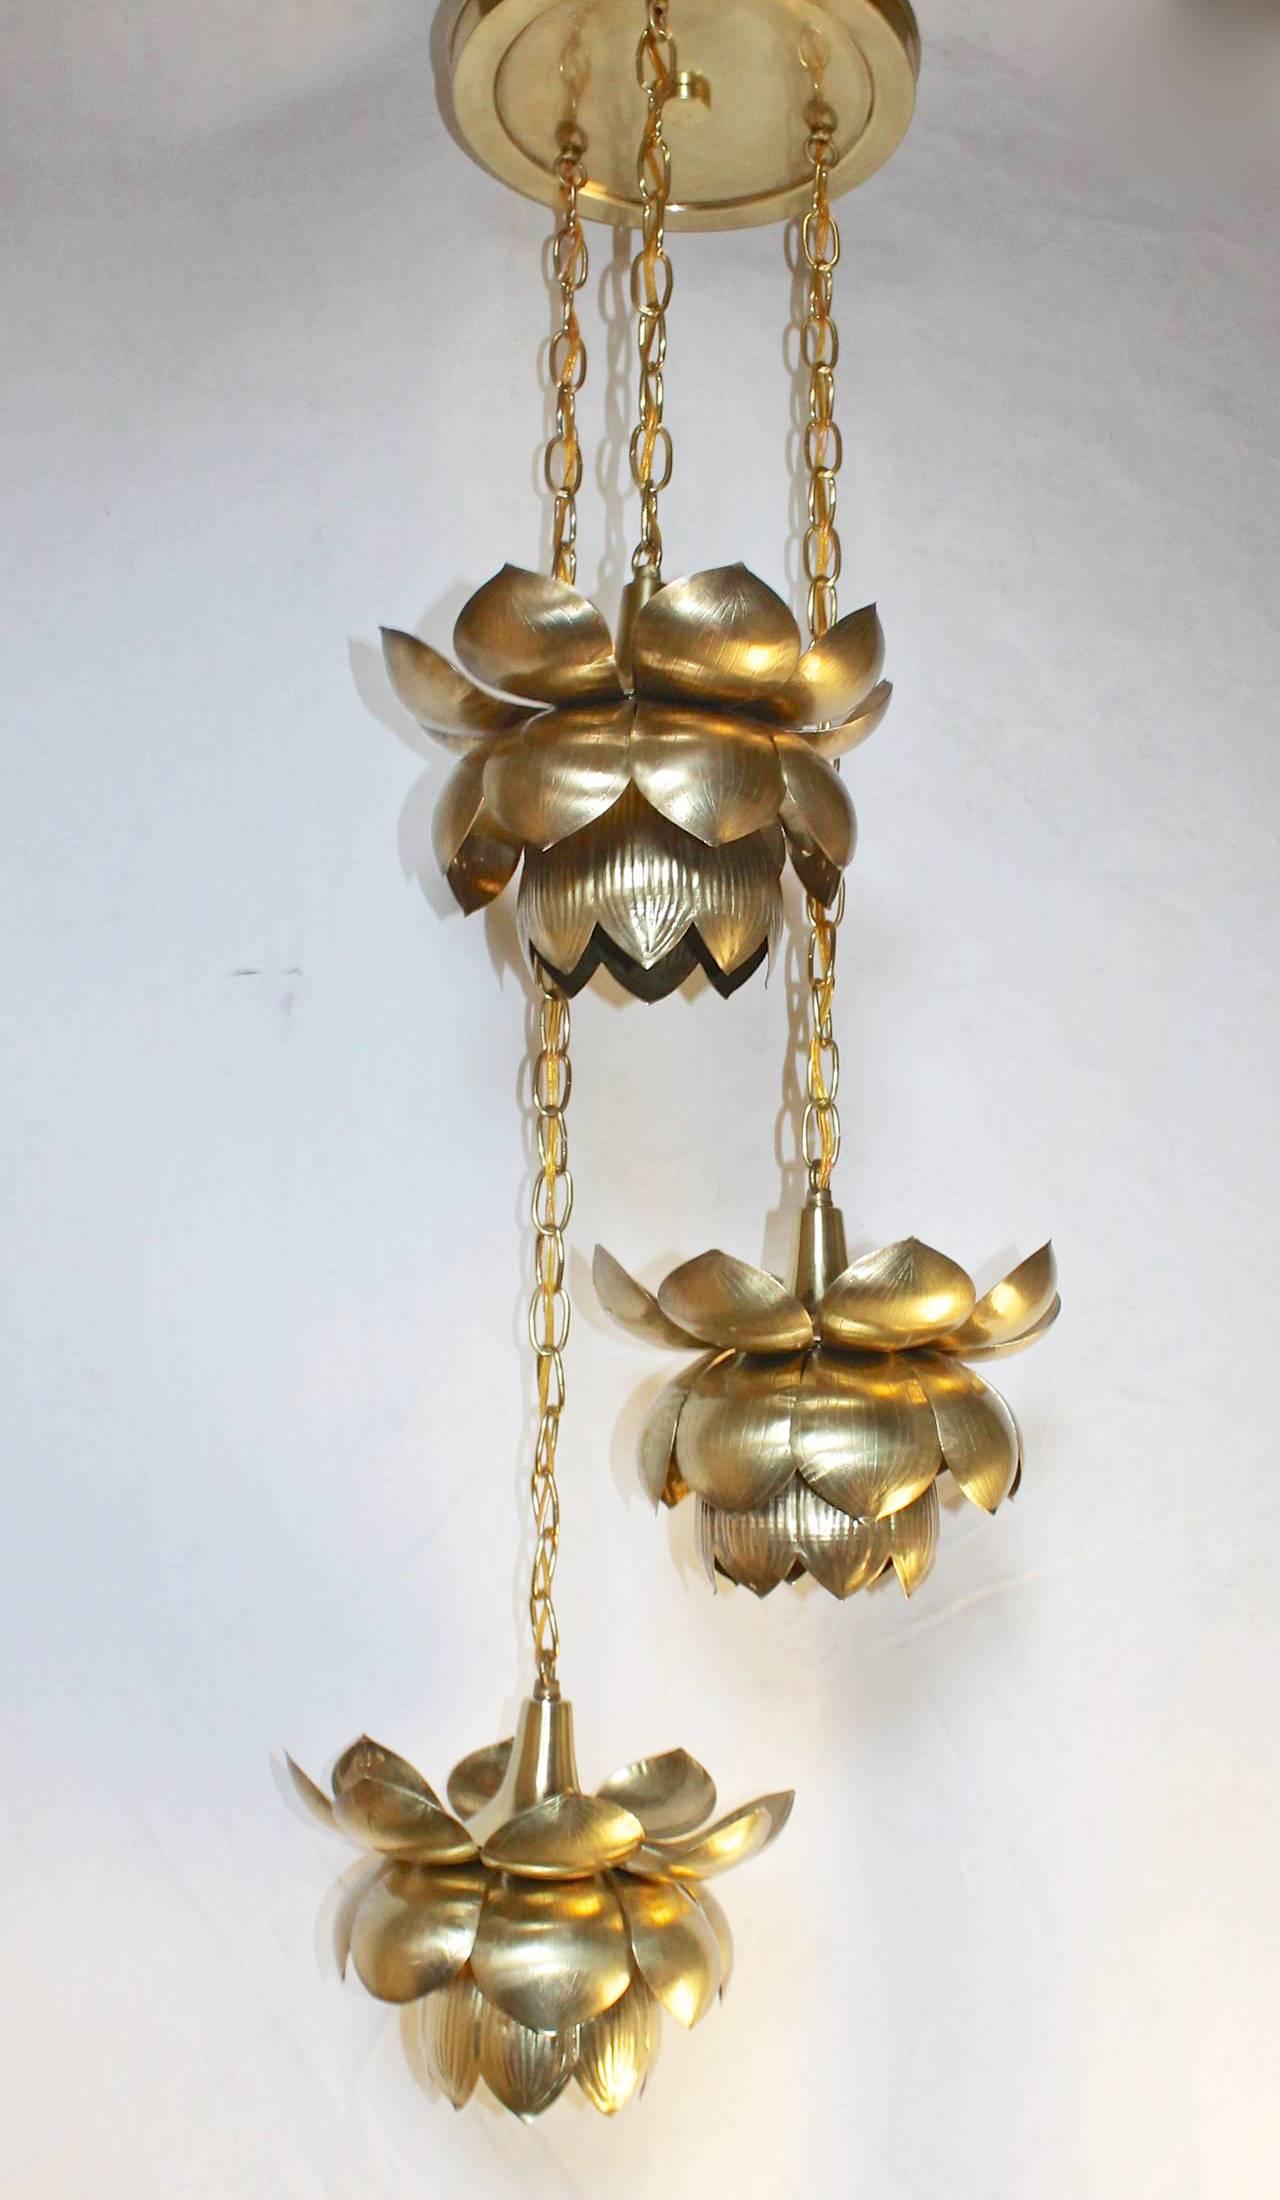 Three brass lotus light chandelier imported by The Feldman Company, Los Angeles. Newly rewired. Dimension: Each lotus 11" wide x 8" tall. Upon request we can separate the 3 lotus lights to hang with their own ceiling cap.